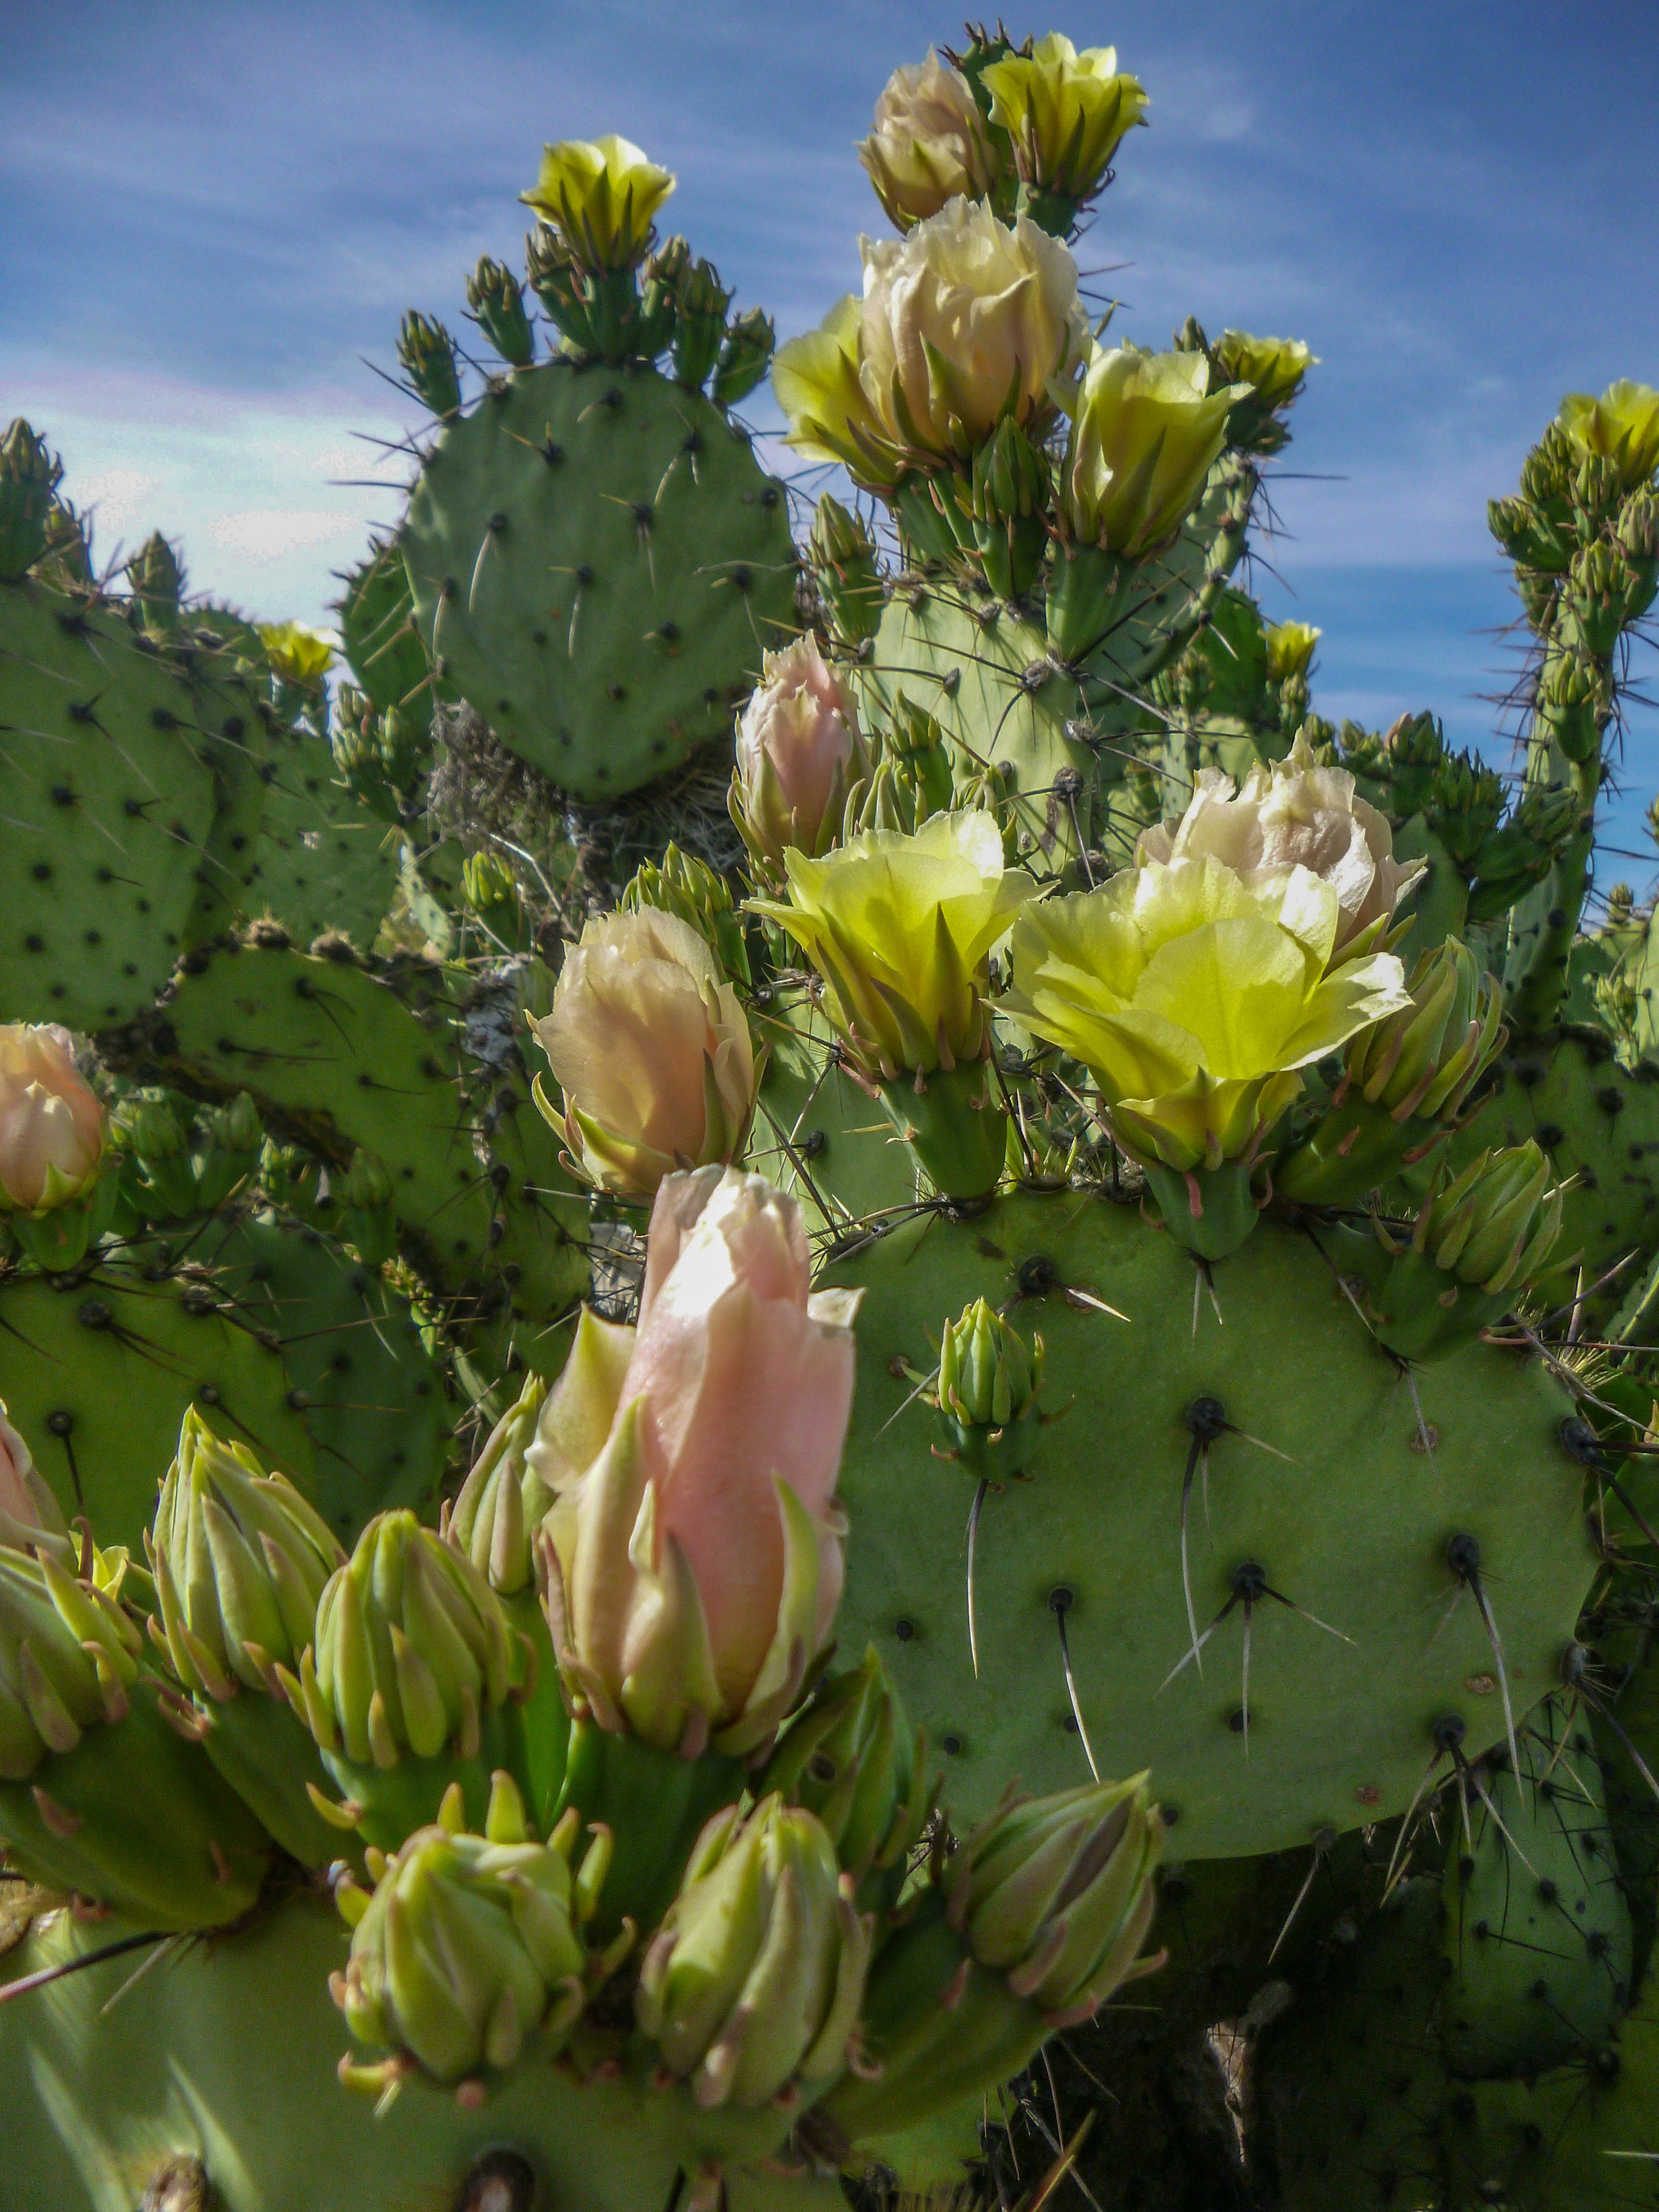 prickly pear cactus in bloom